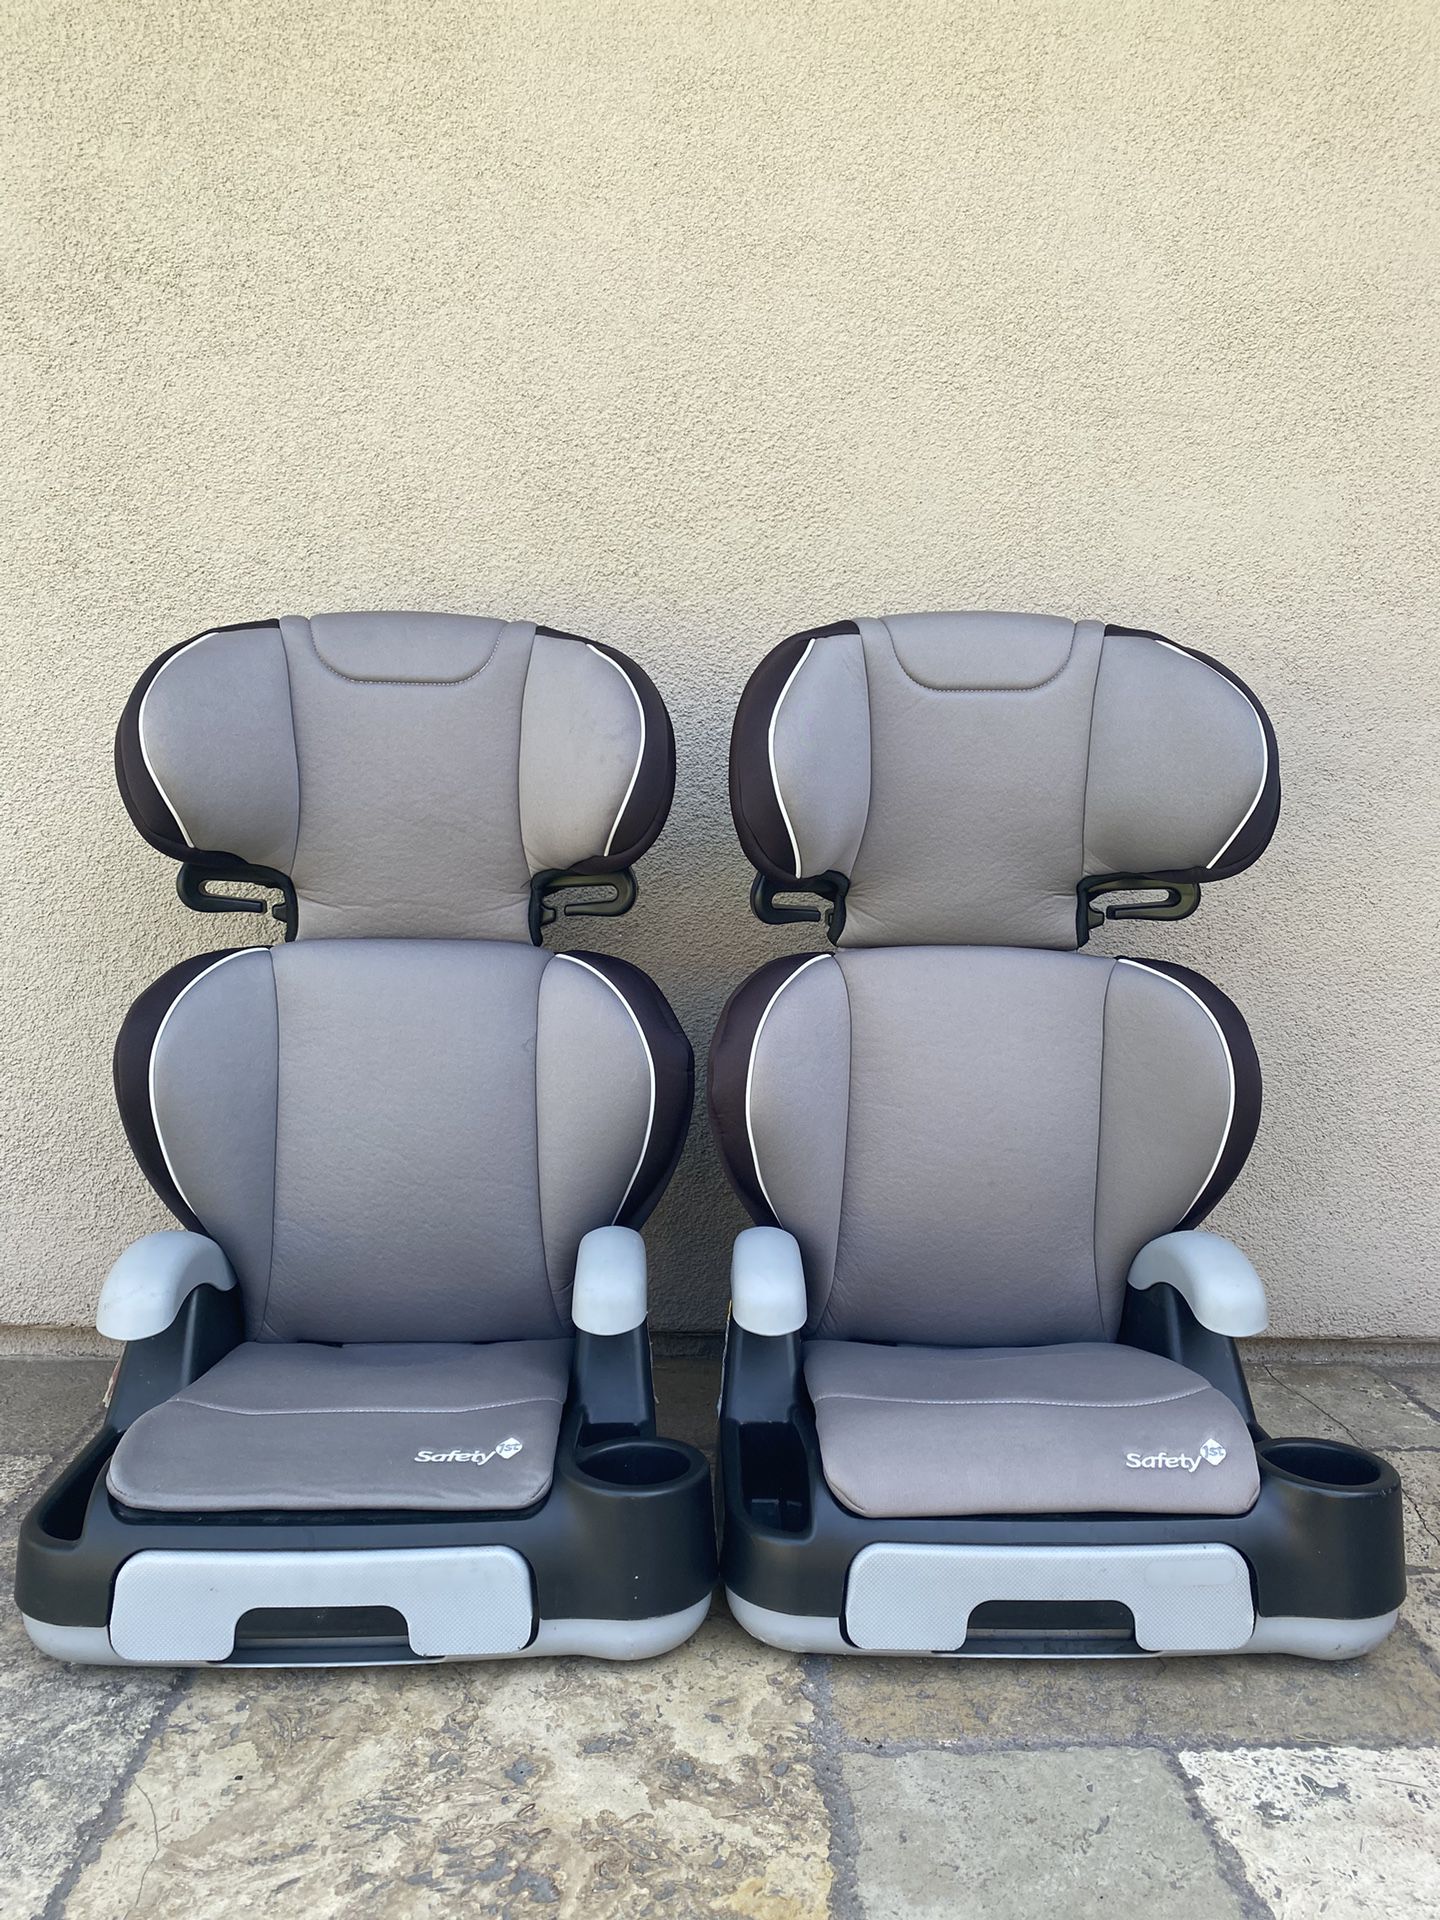 PRACTICALLY NEW SAFETY 1st MATCHING BOOSTER SEATS!!